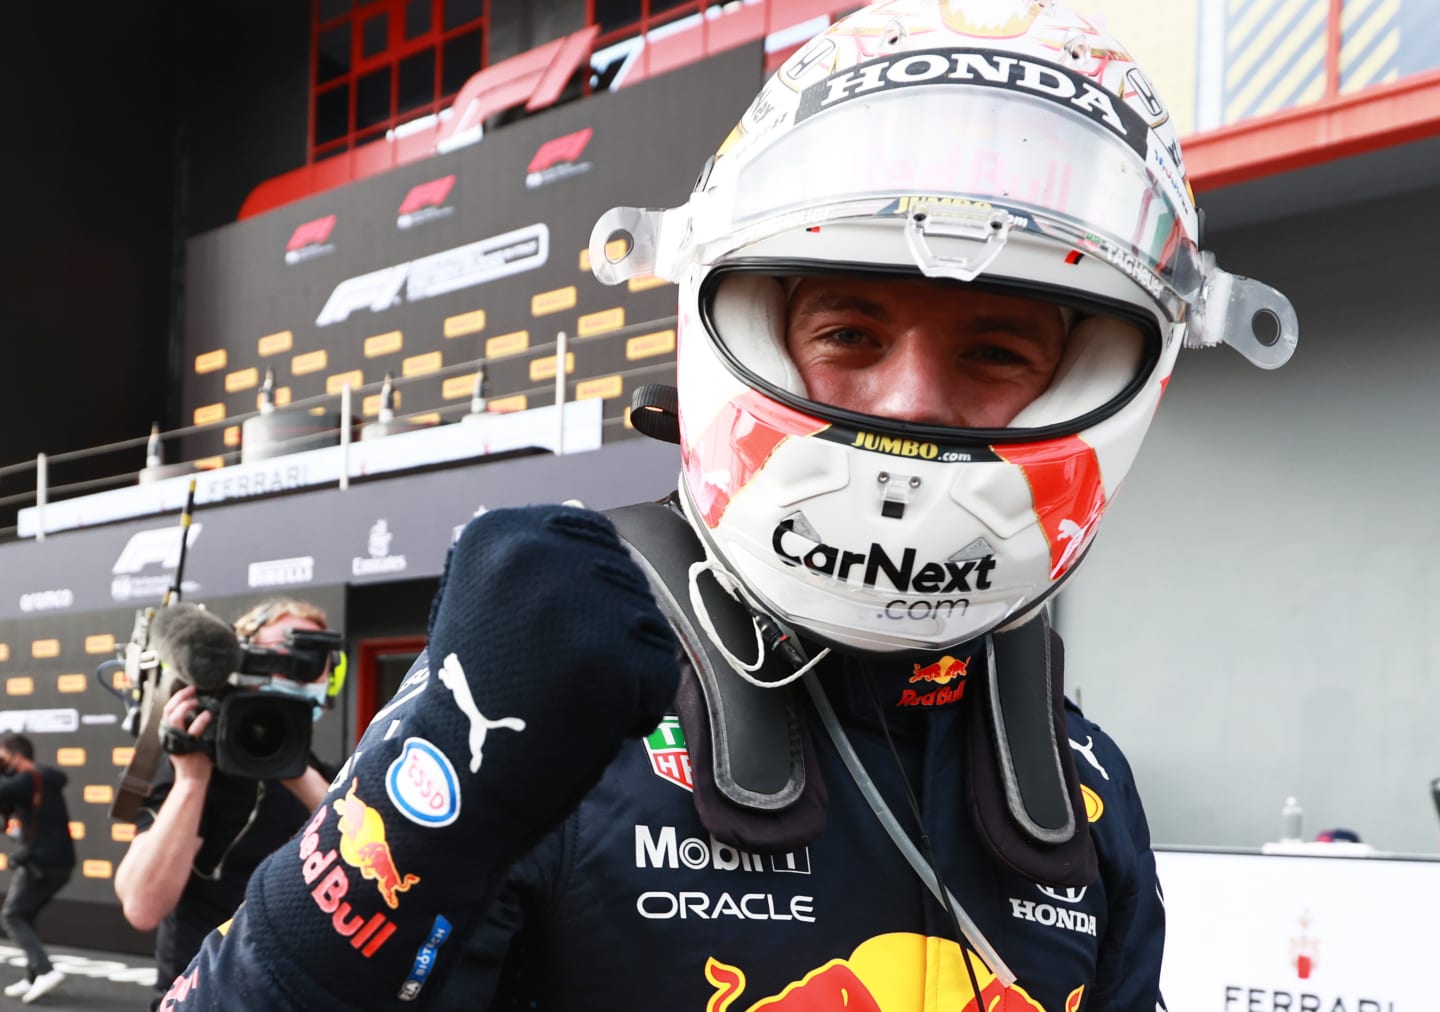 IMOLA, ITALY - APRIL 18: Race winner Max Verstappen of Netherlands and Red Bull Racing celebrates